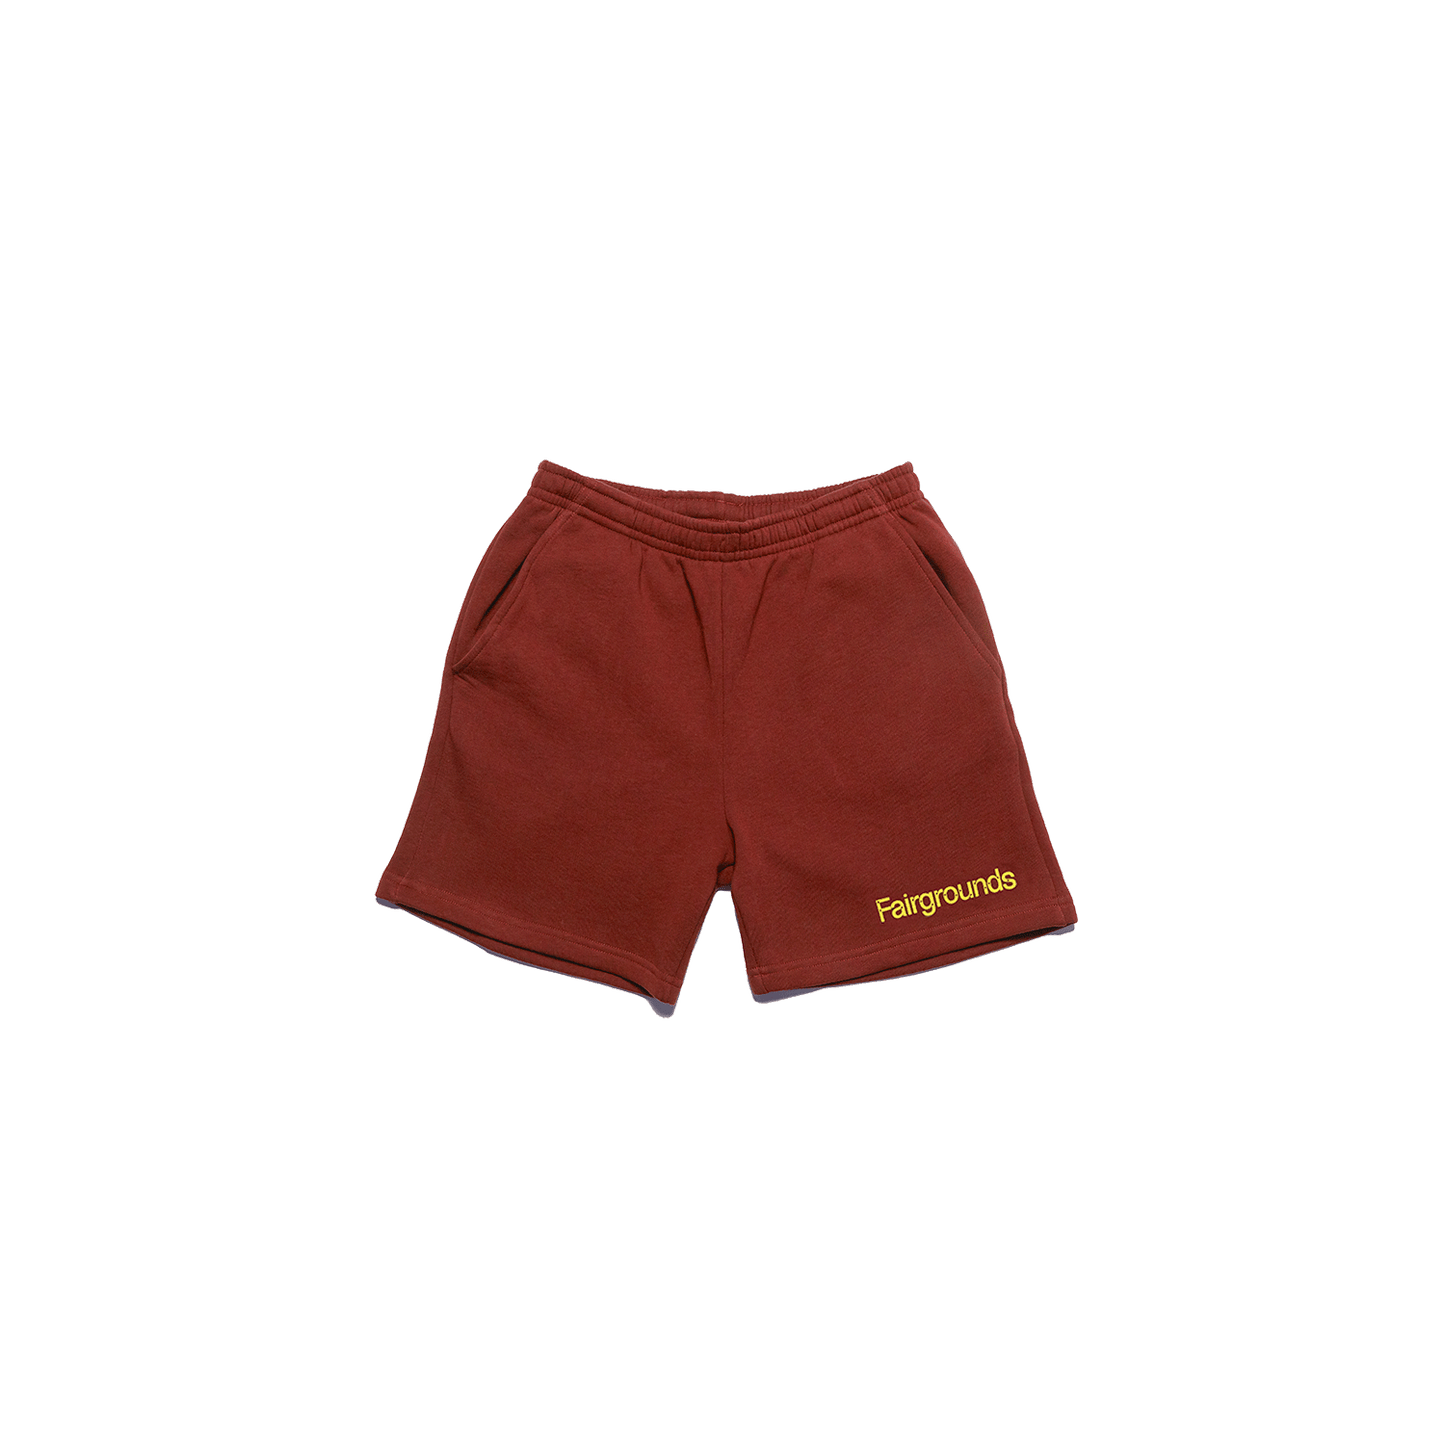 Ace Shorts - Candy Apple